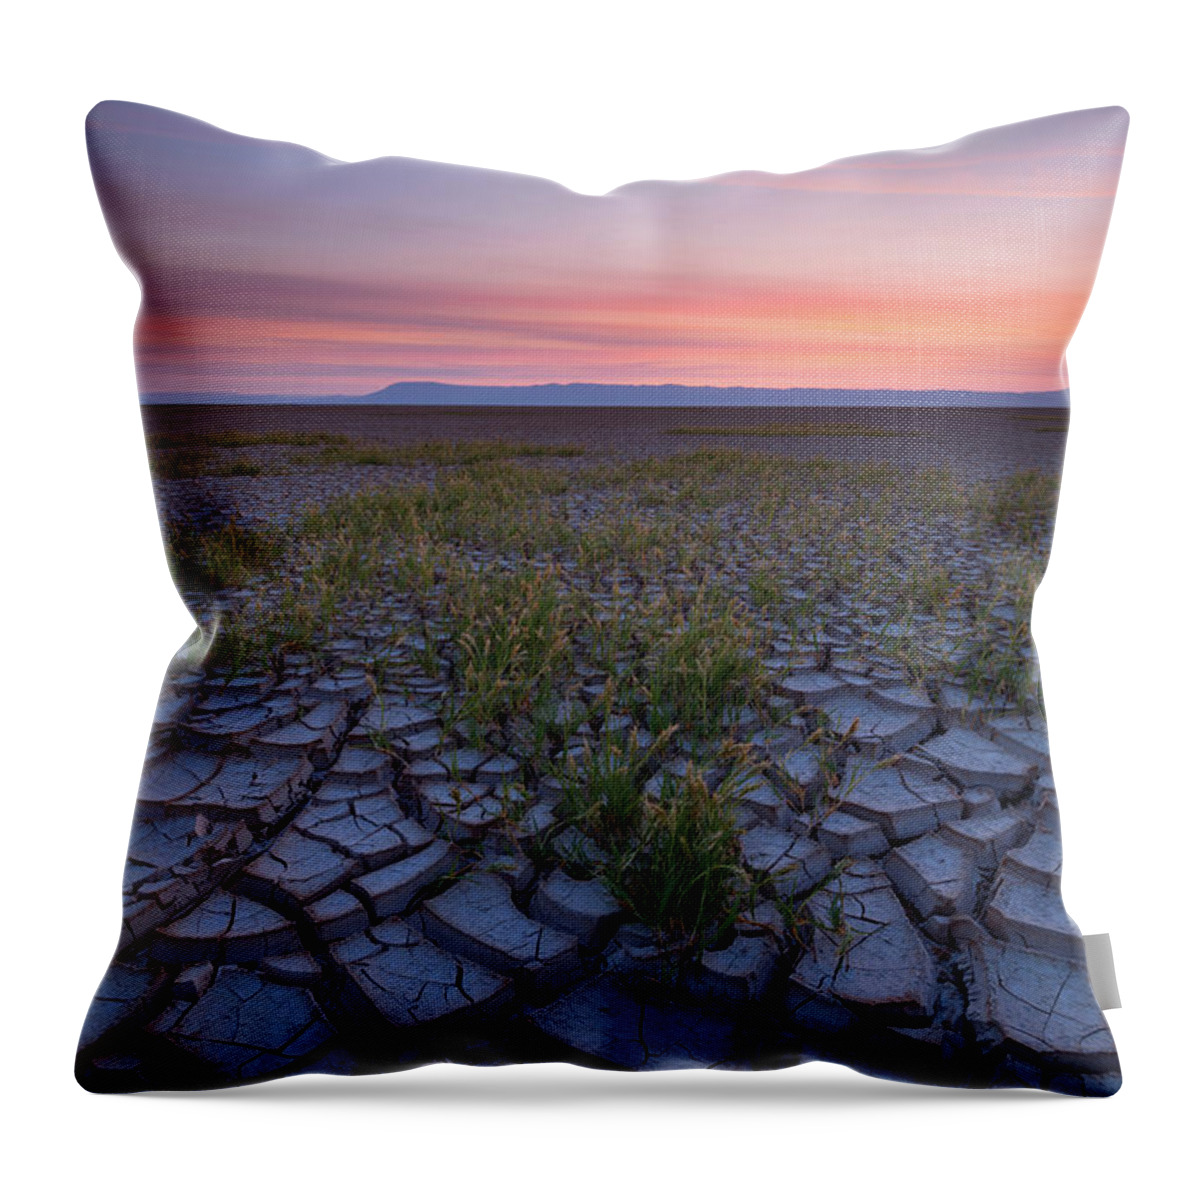 Landscape Throw Pillow featuring the photograph Sunrise on the Playa by Andrew Kumler